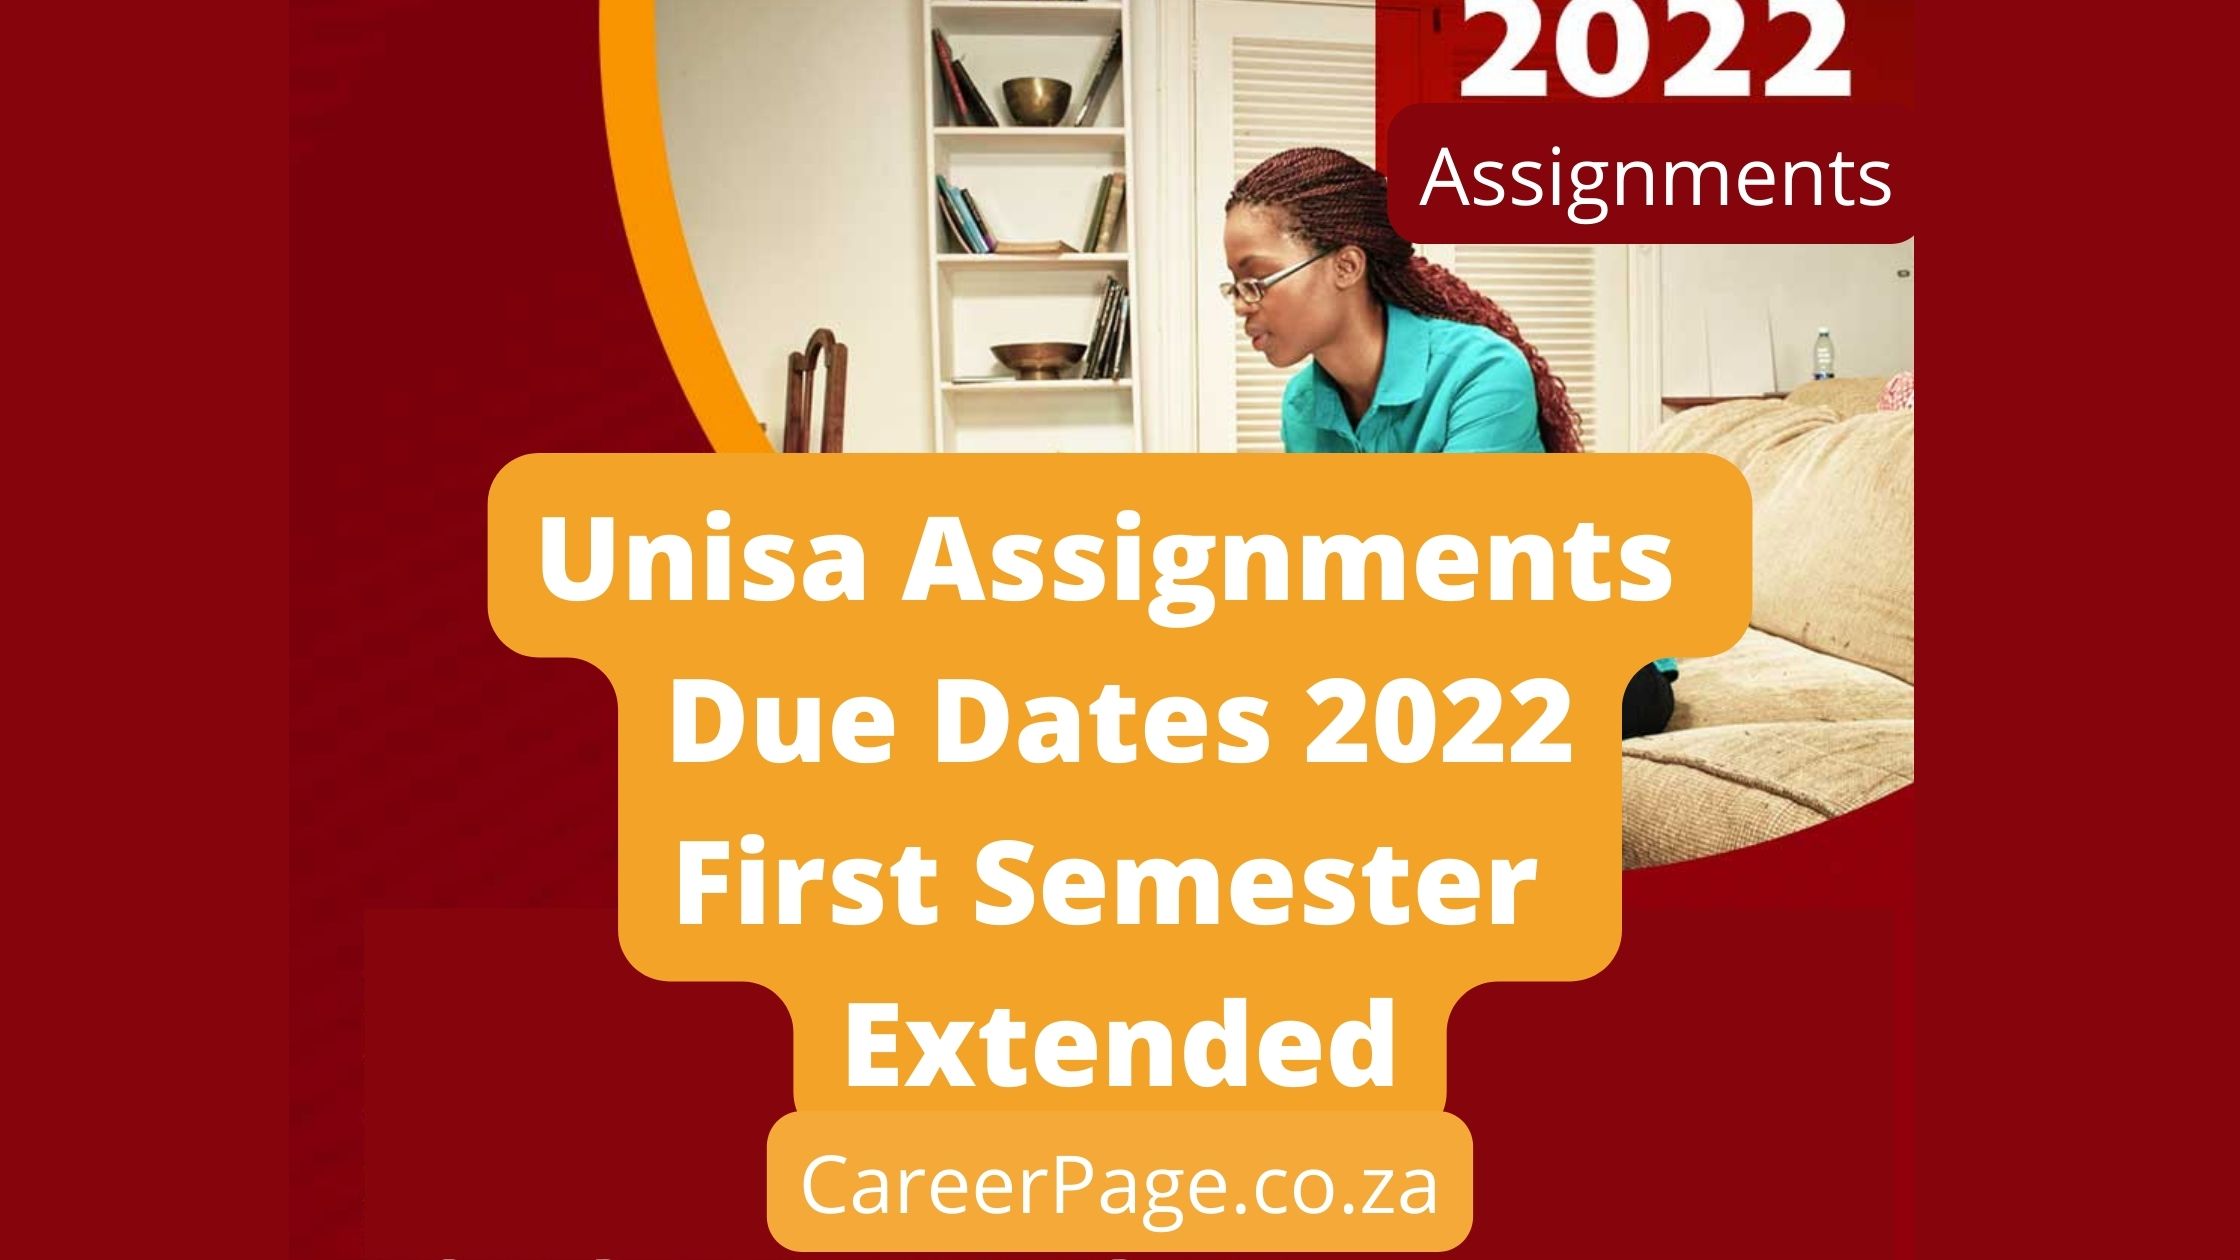 Unisa Assignments Due Dates 2022 First Semester Extended